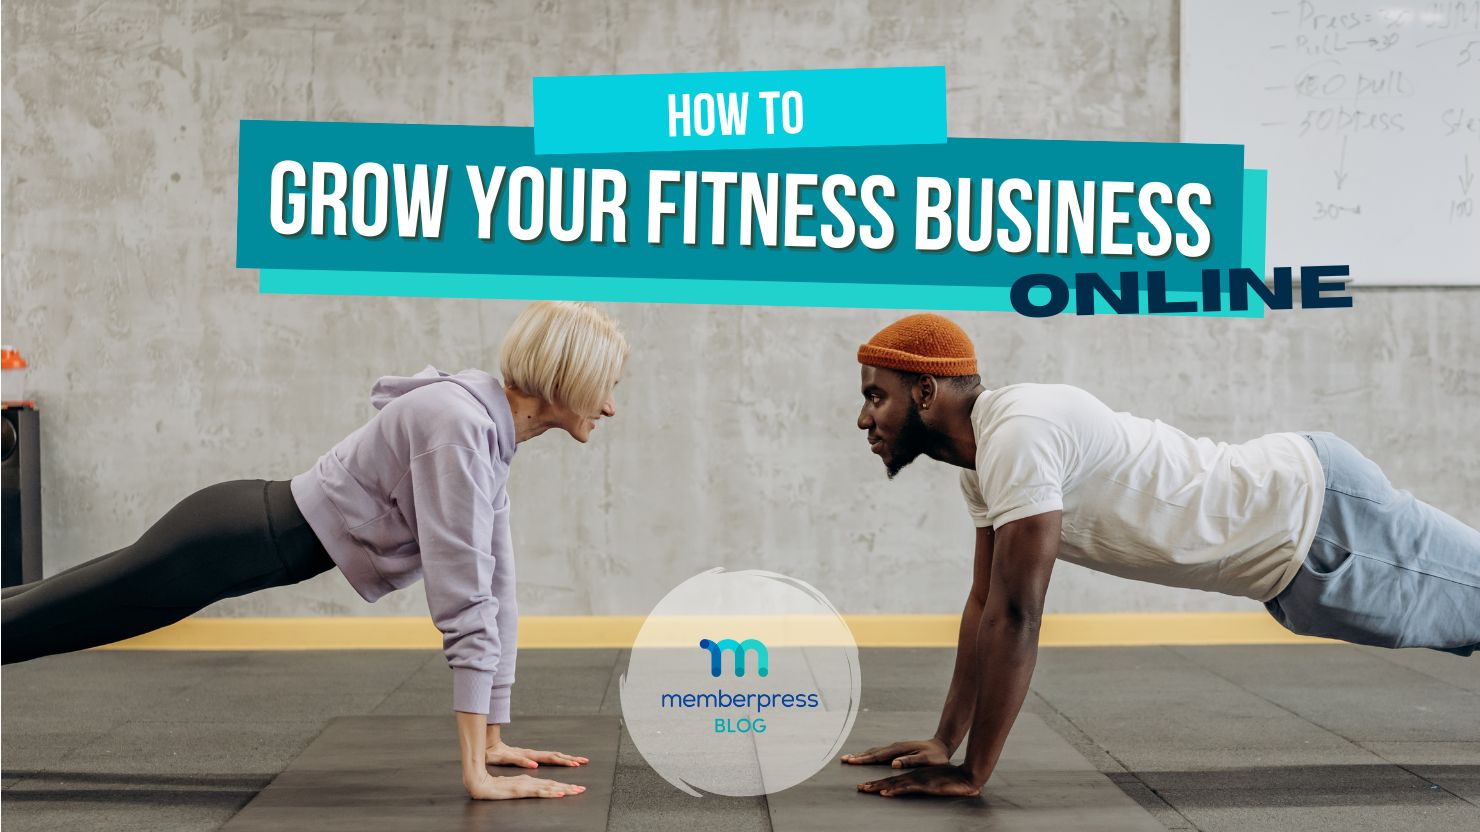 How to grow your fitness business online